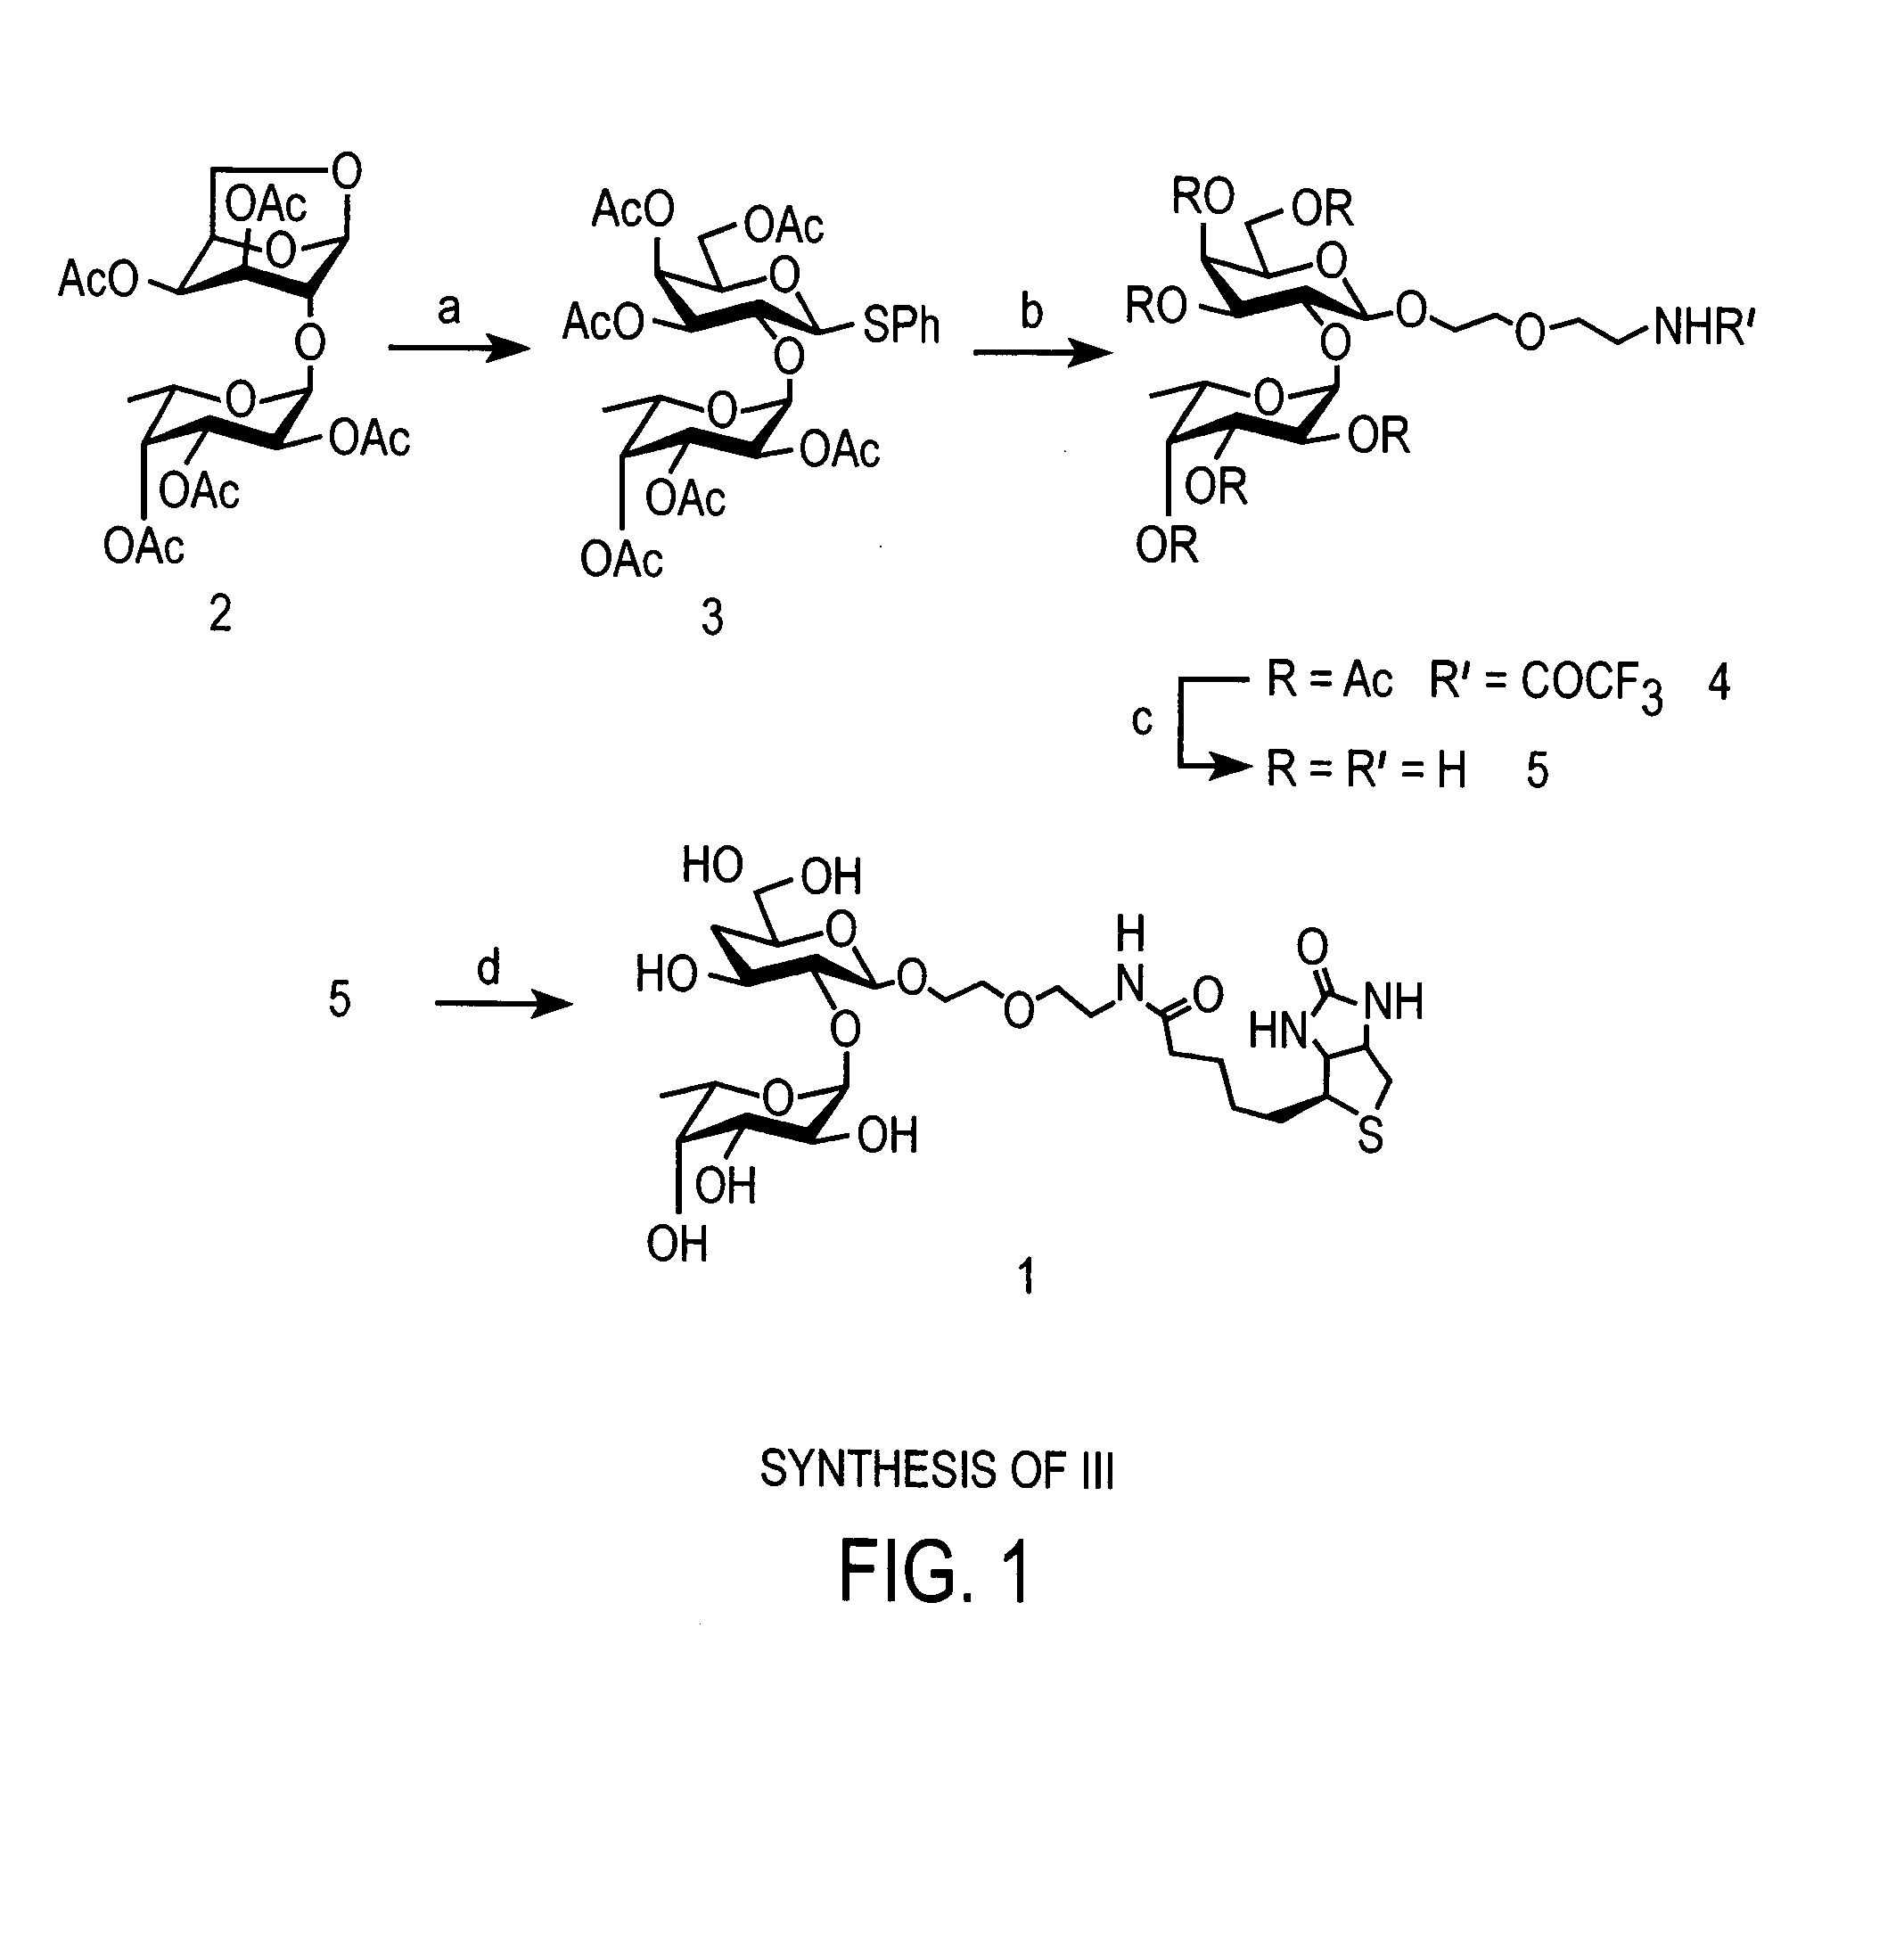 Methods of inducing neuronal growth by a Fucose-α(1-2) galactose (fuc-α(1-2) gal) moiety and a lectin